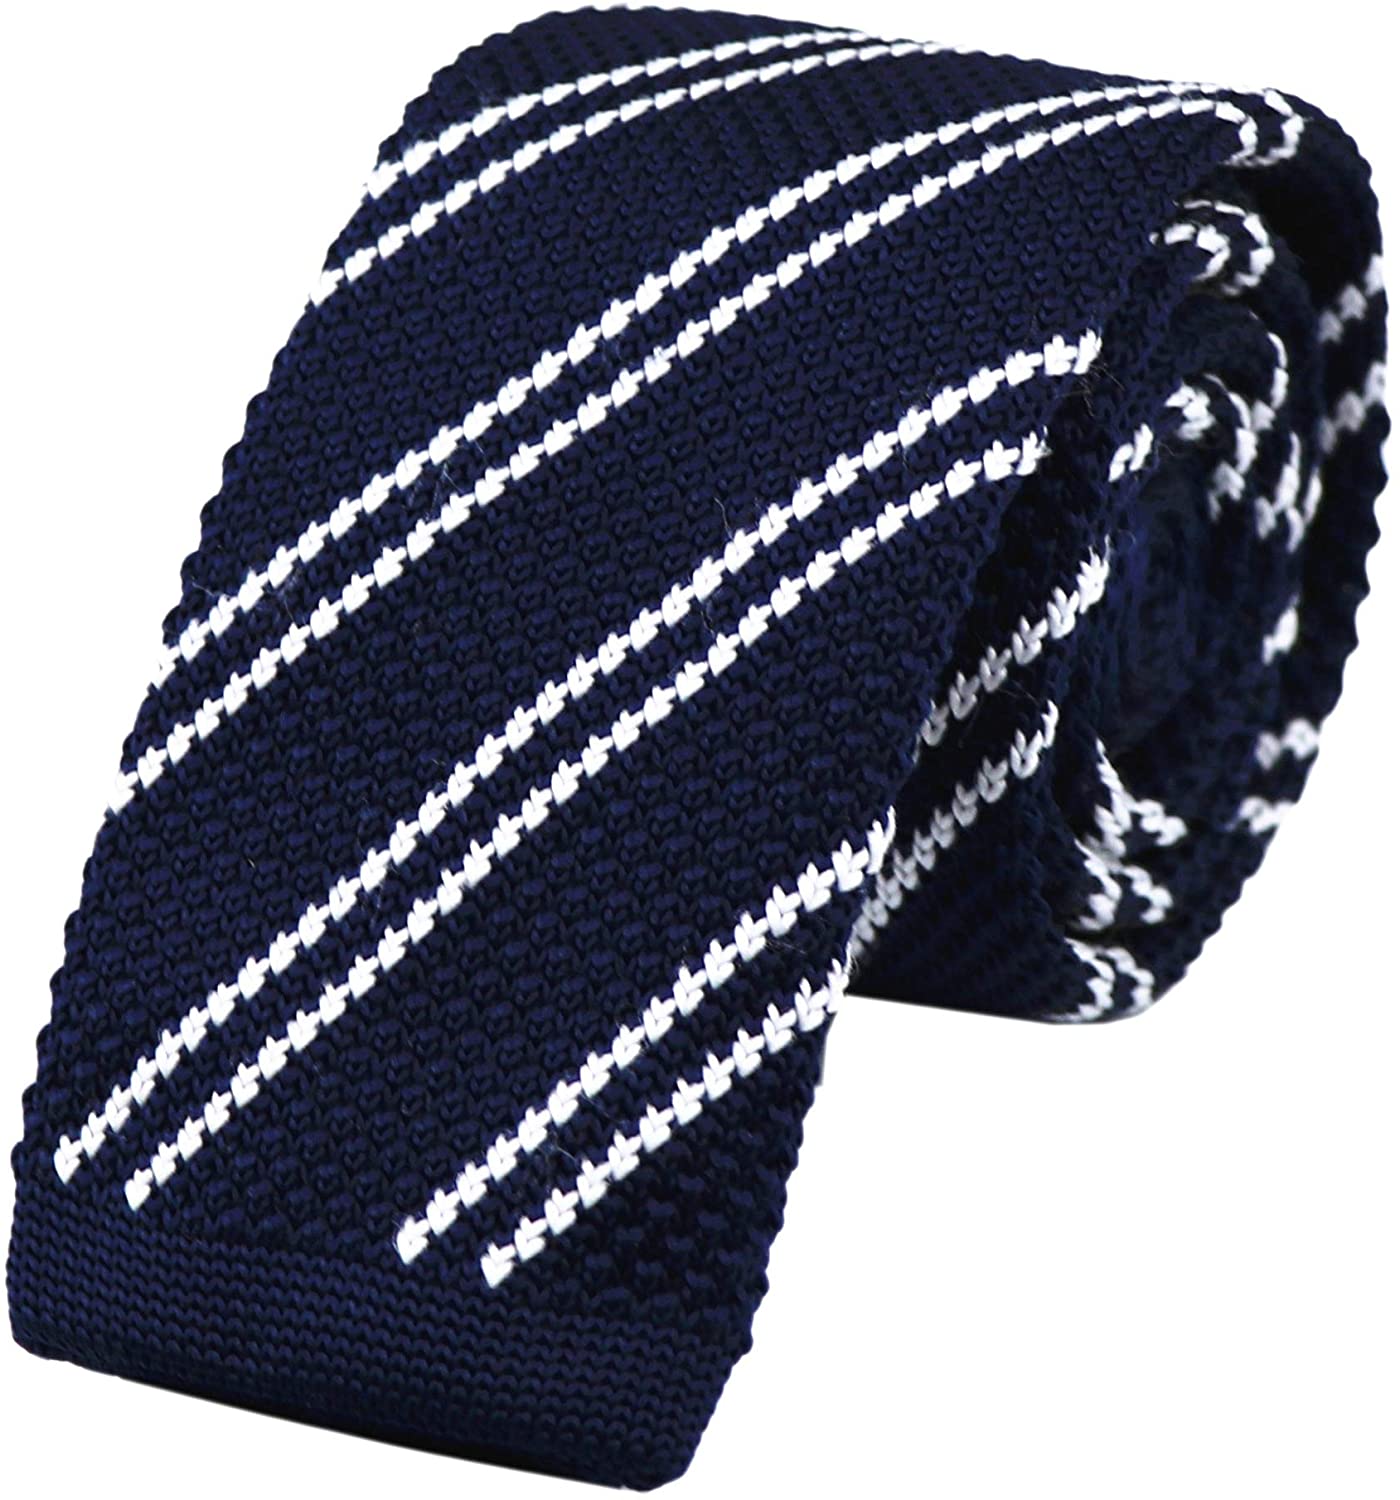 DQT New Knitted Necktie Stripe Casual Business Party Knit Men's Skinny Tie 